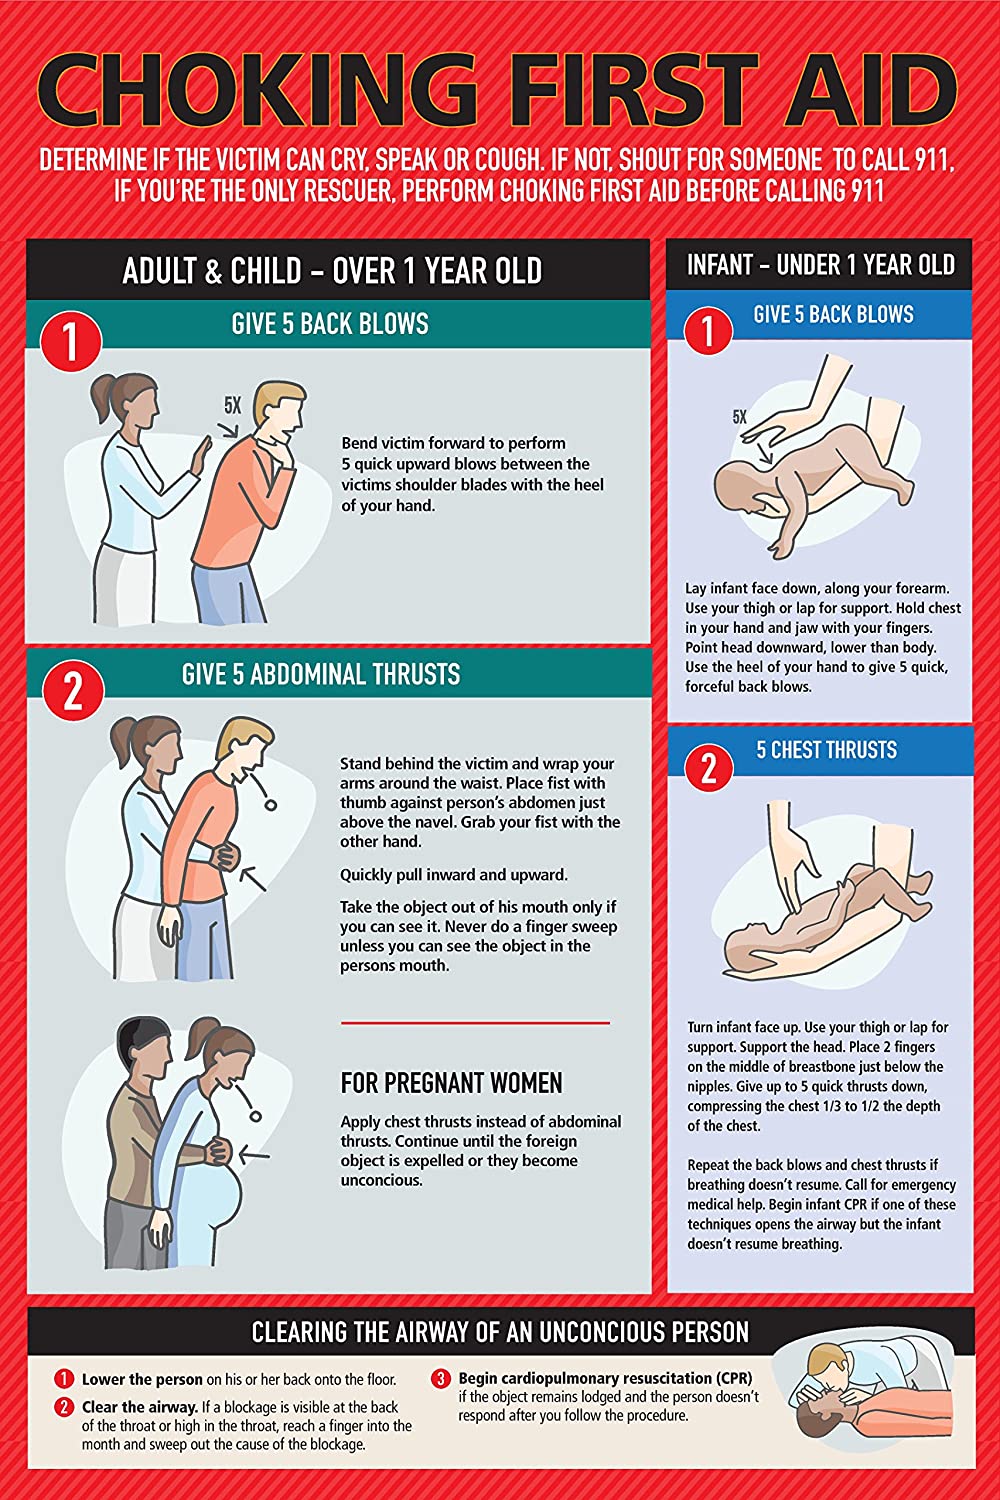 Safety Choking Victim Guide, First Aid Poster for Infants, Kids, Those Pregnant, and Adults, Laminated